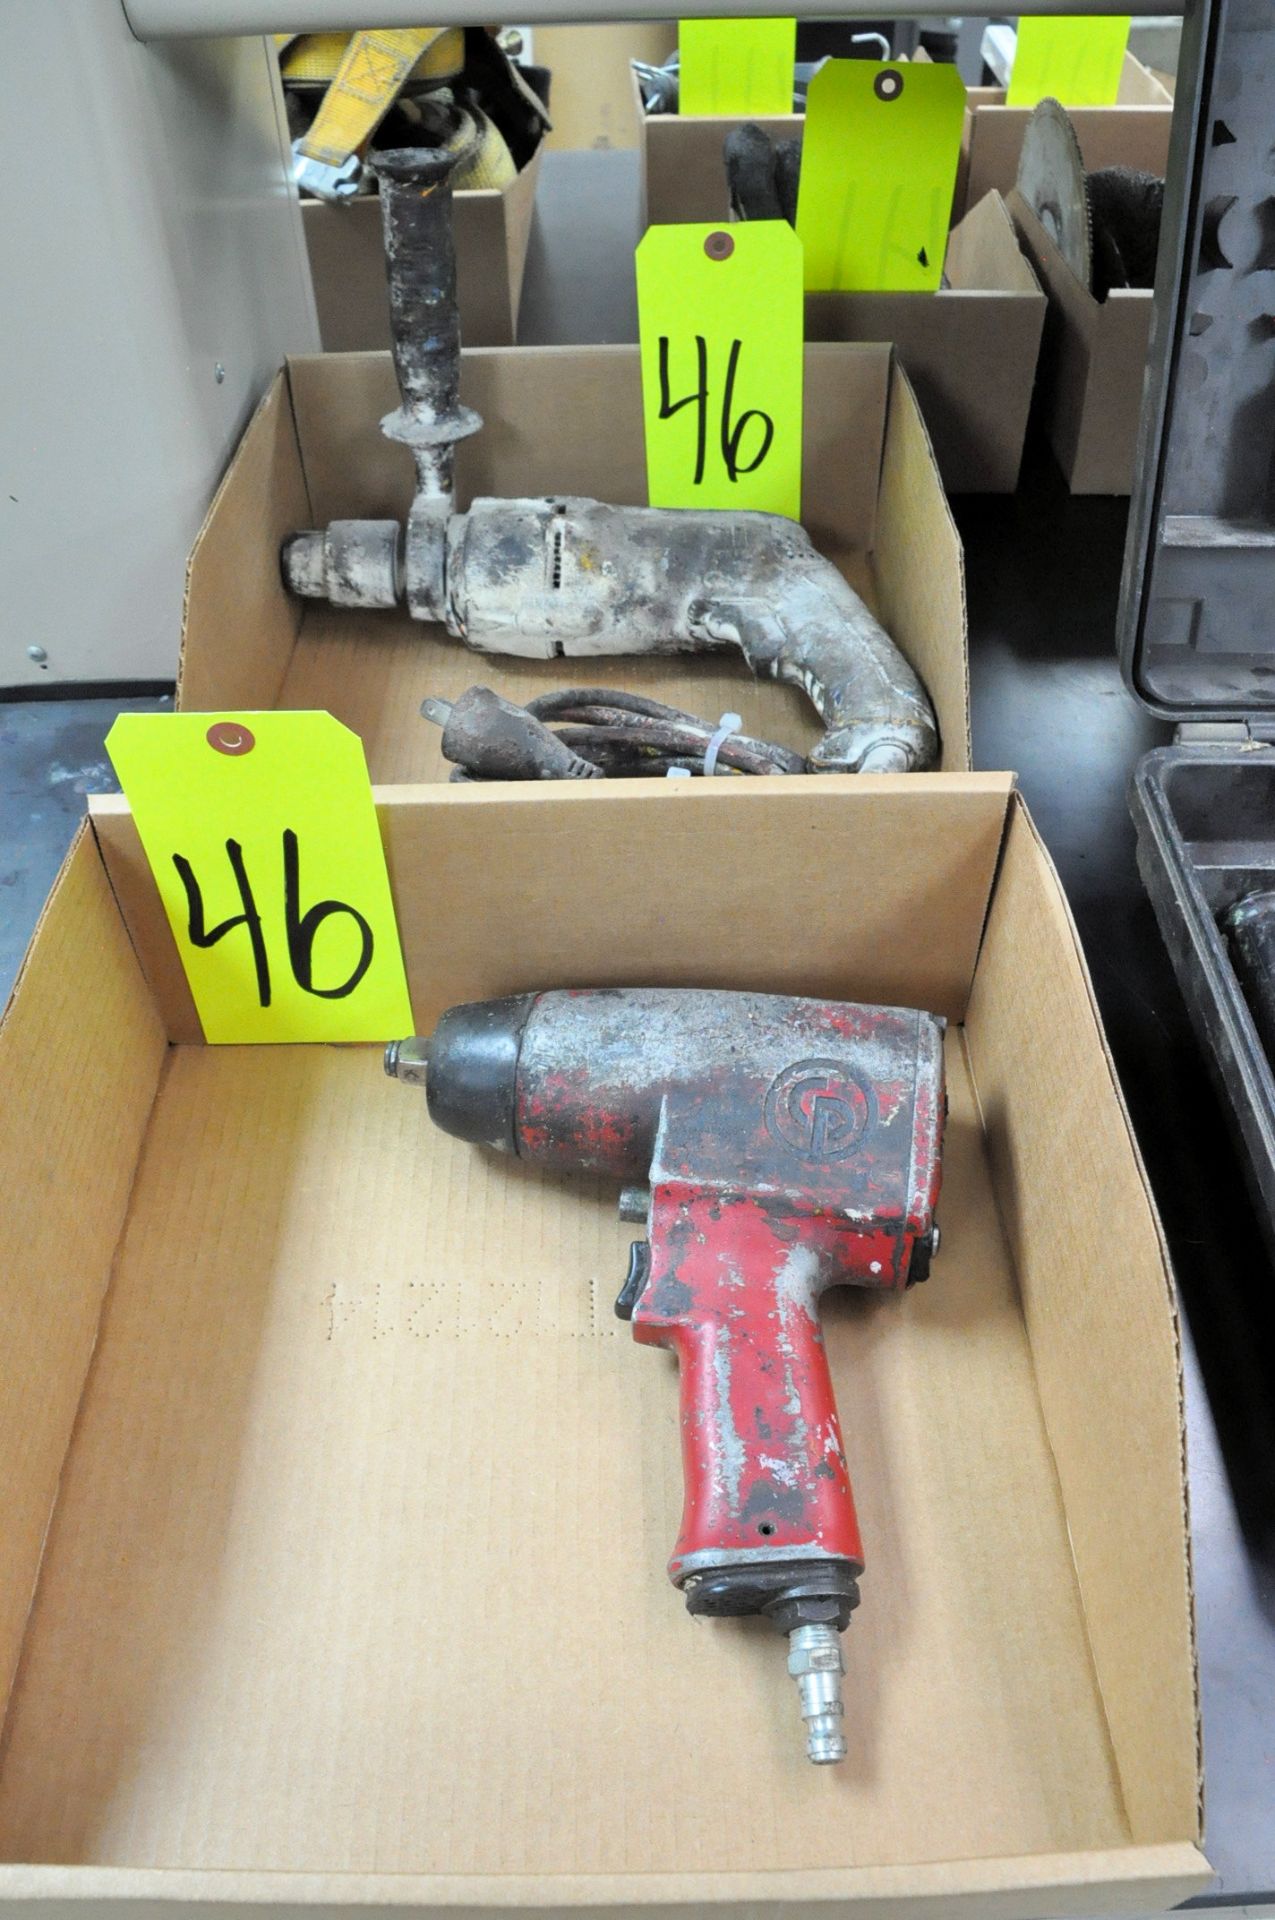 Lot-(1) CP 1/2" Pneumatic Impact Gun and (2) 1/2" Electric Drills in (2) Boxes and (1) Case